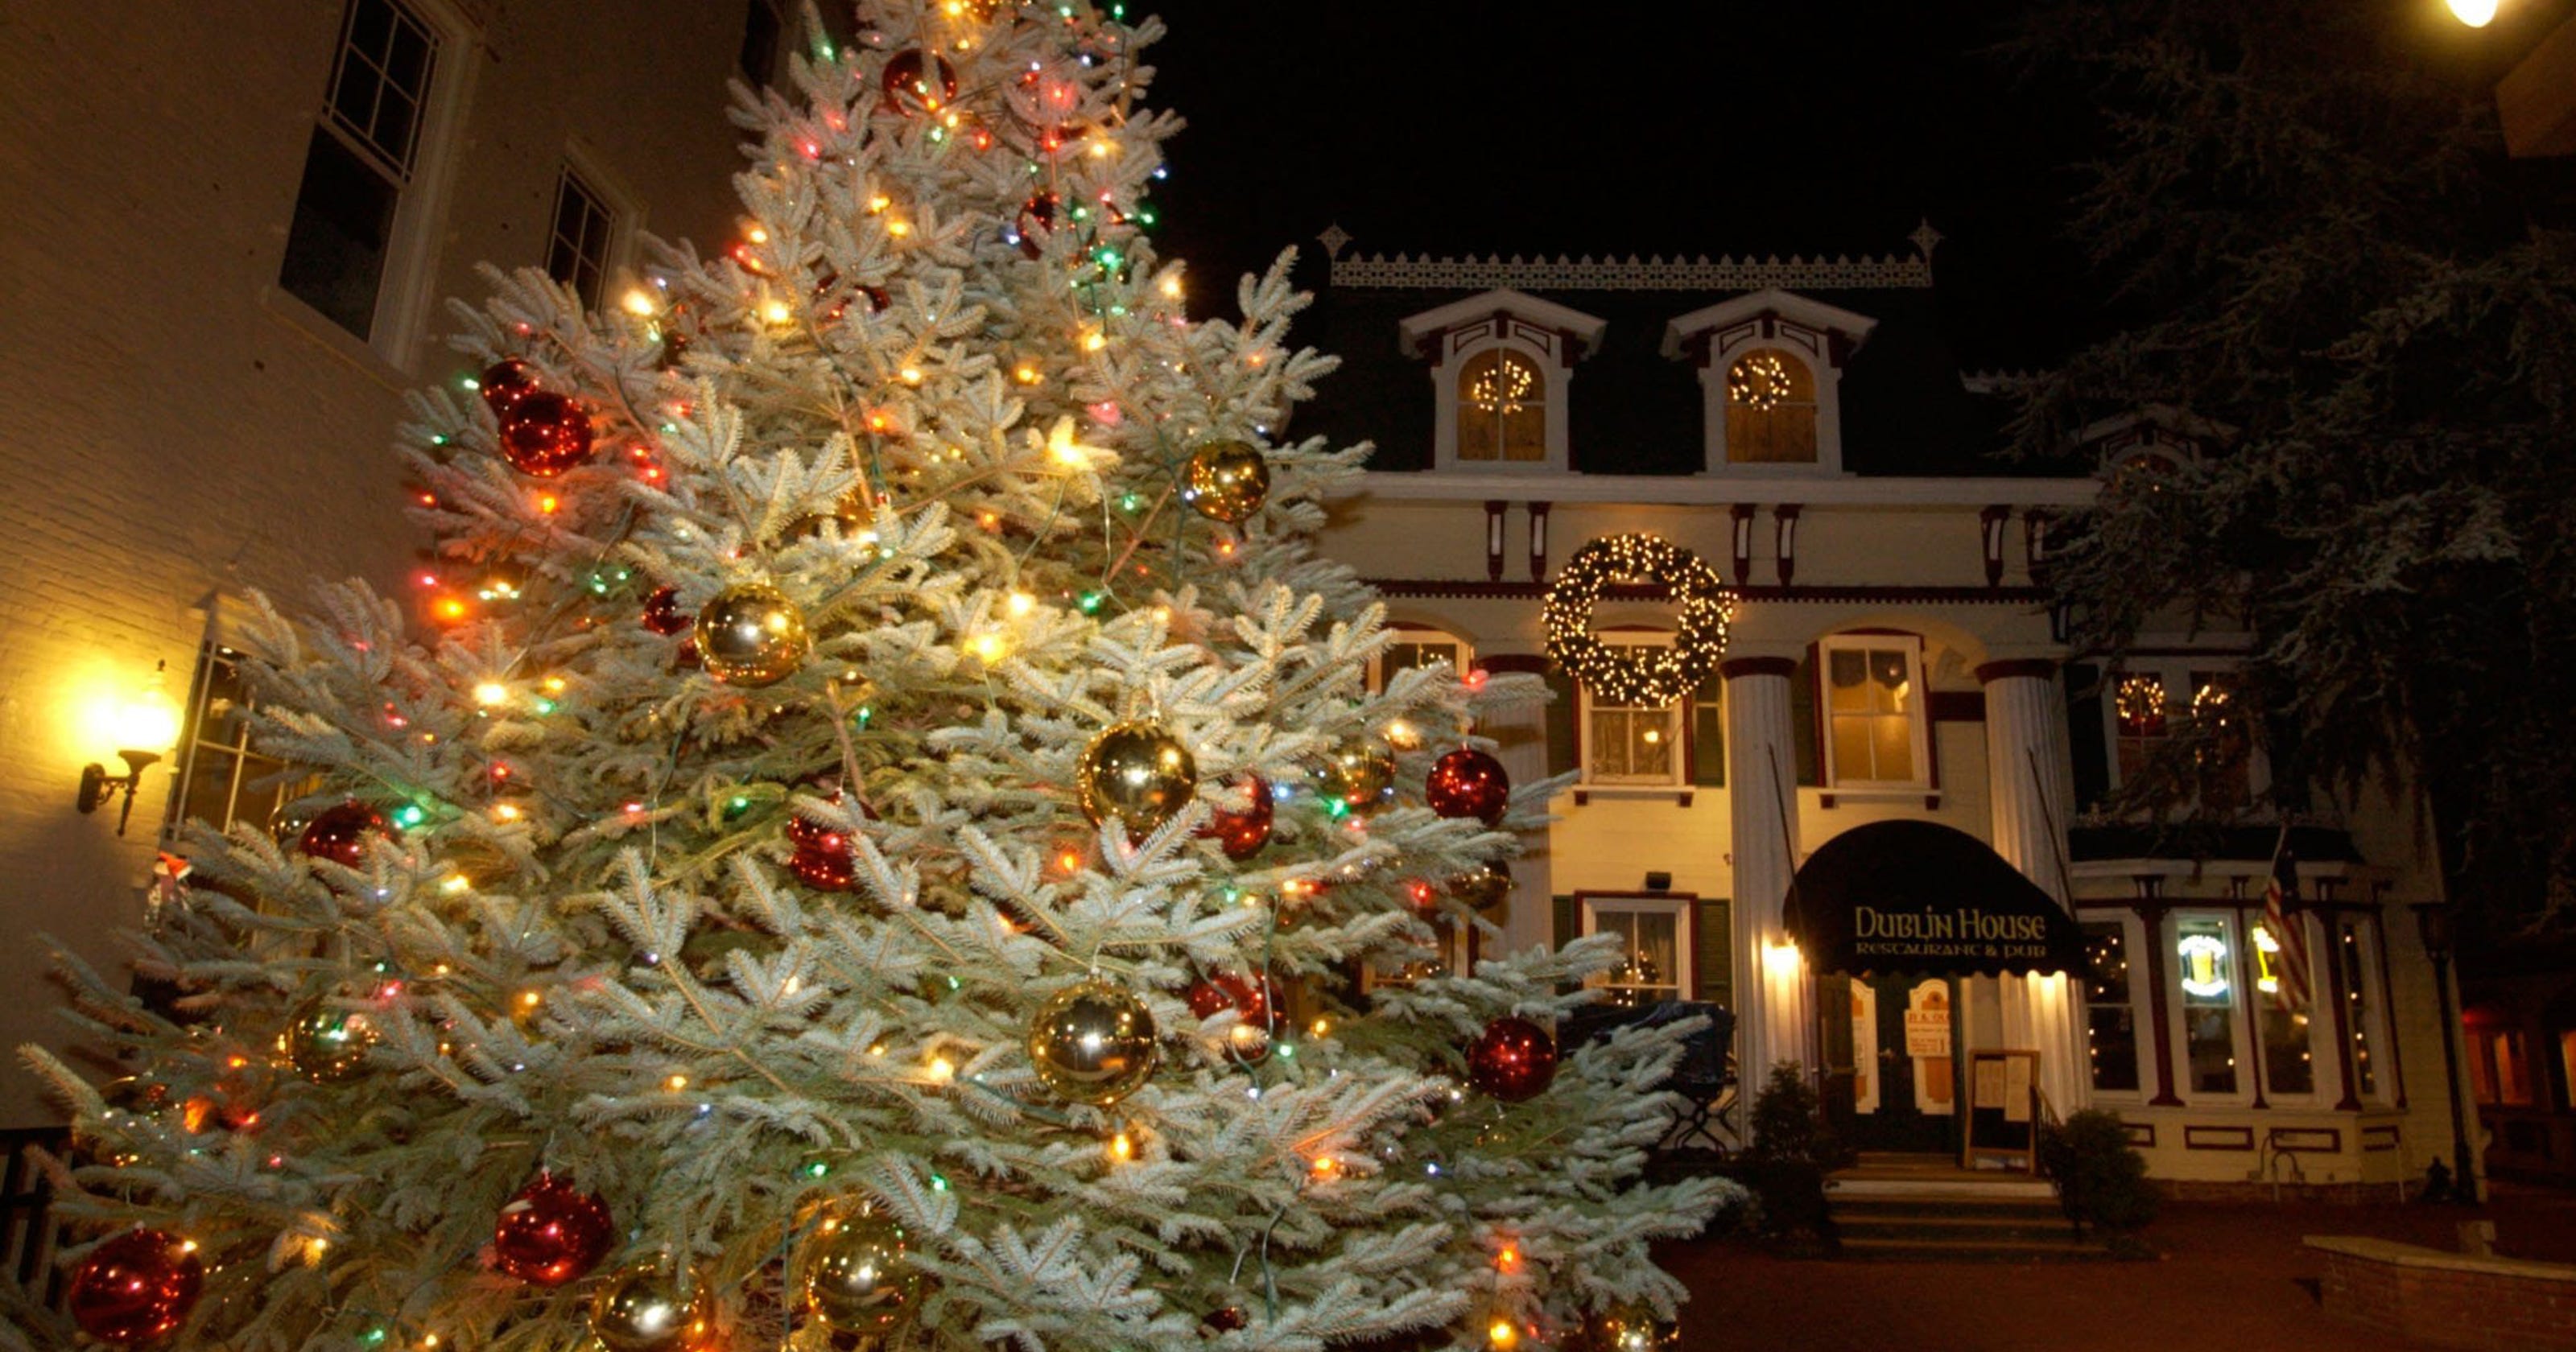 10 great New Jersey Christmas towns3200 x 1680